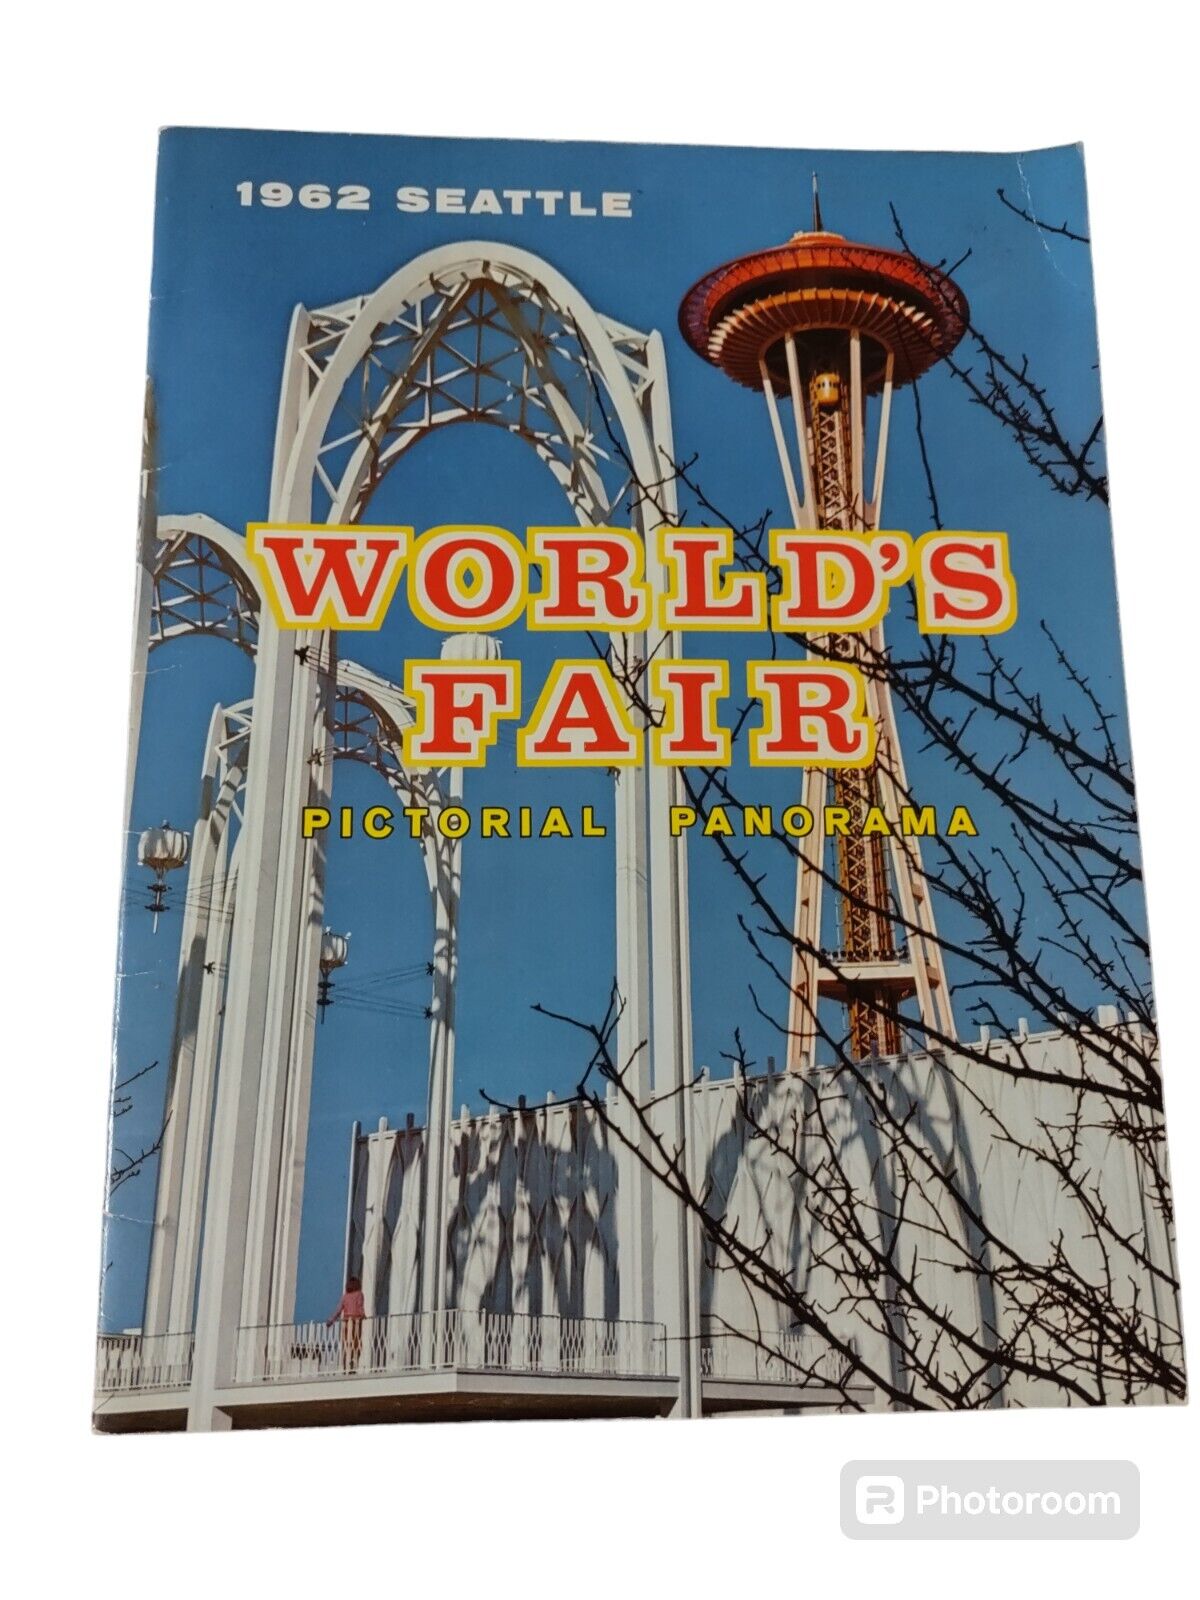 WORLDS FAIR 1962 Seattle Pictorial Panorama Booklet